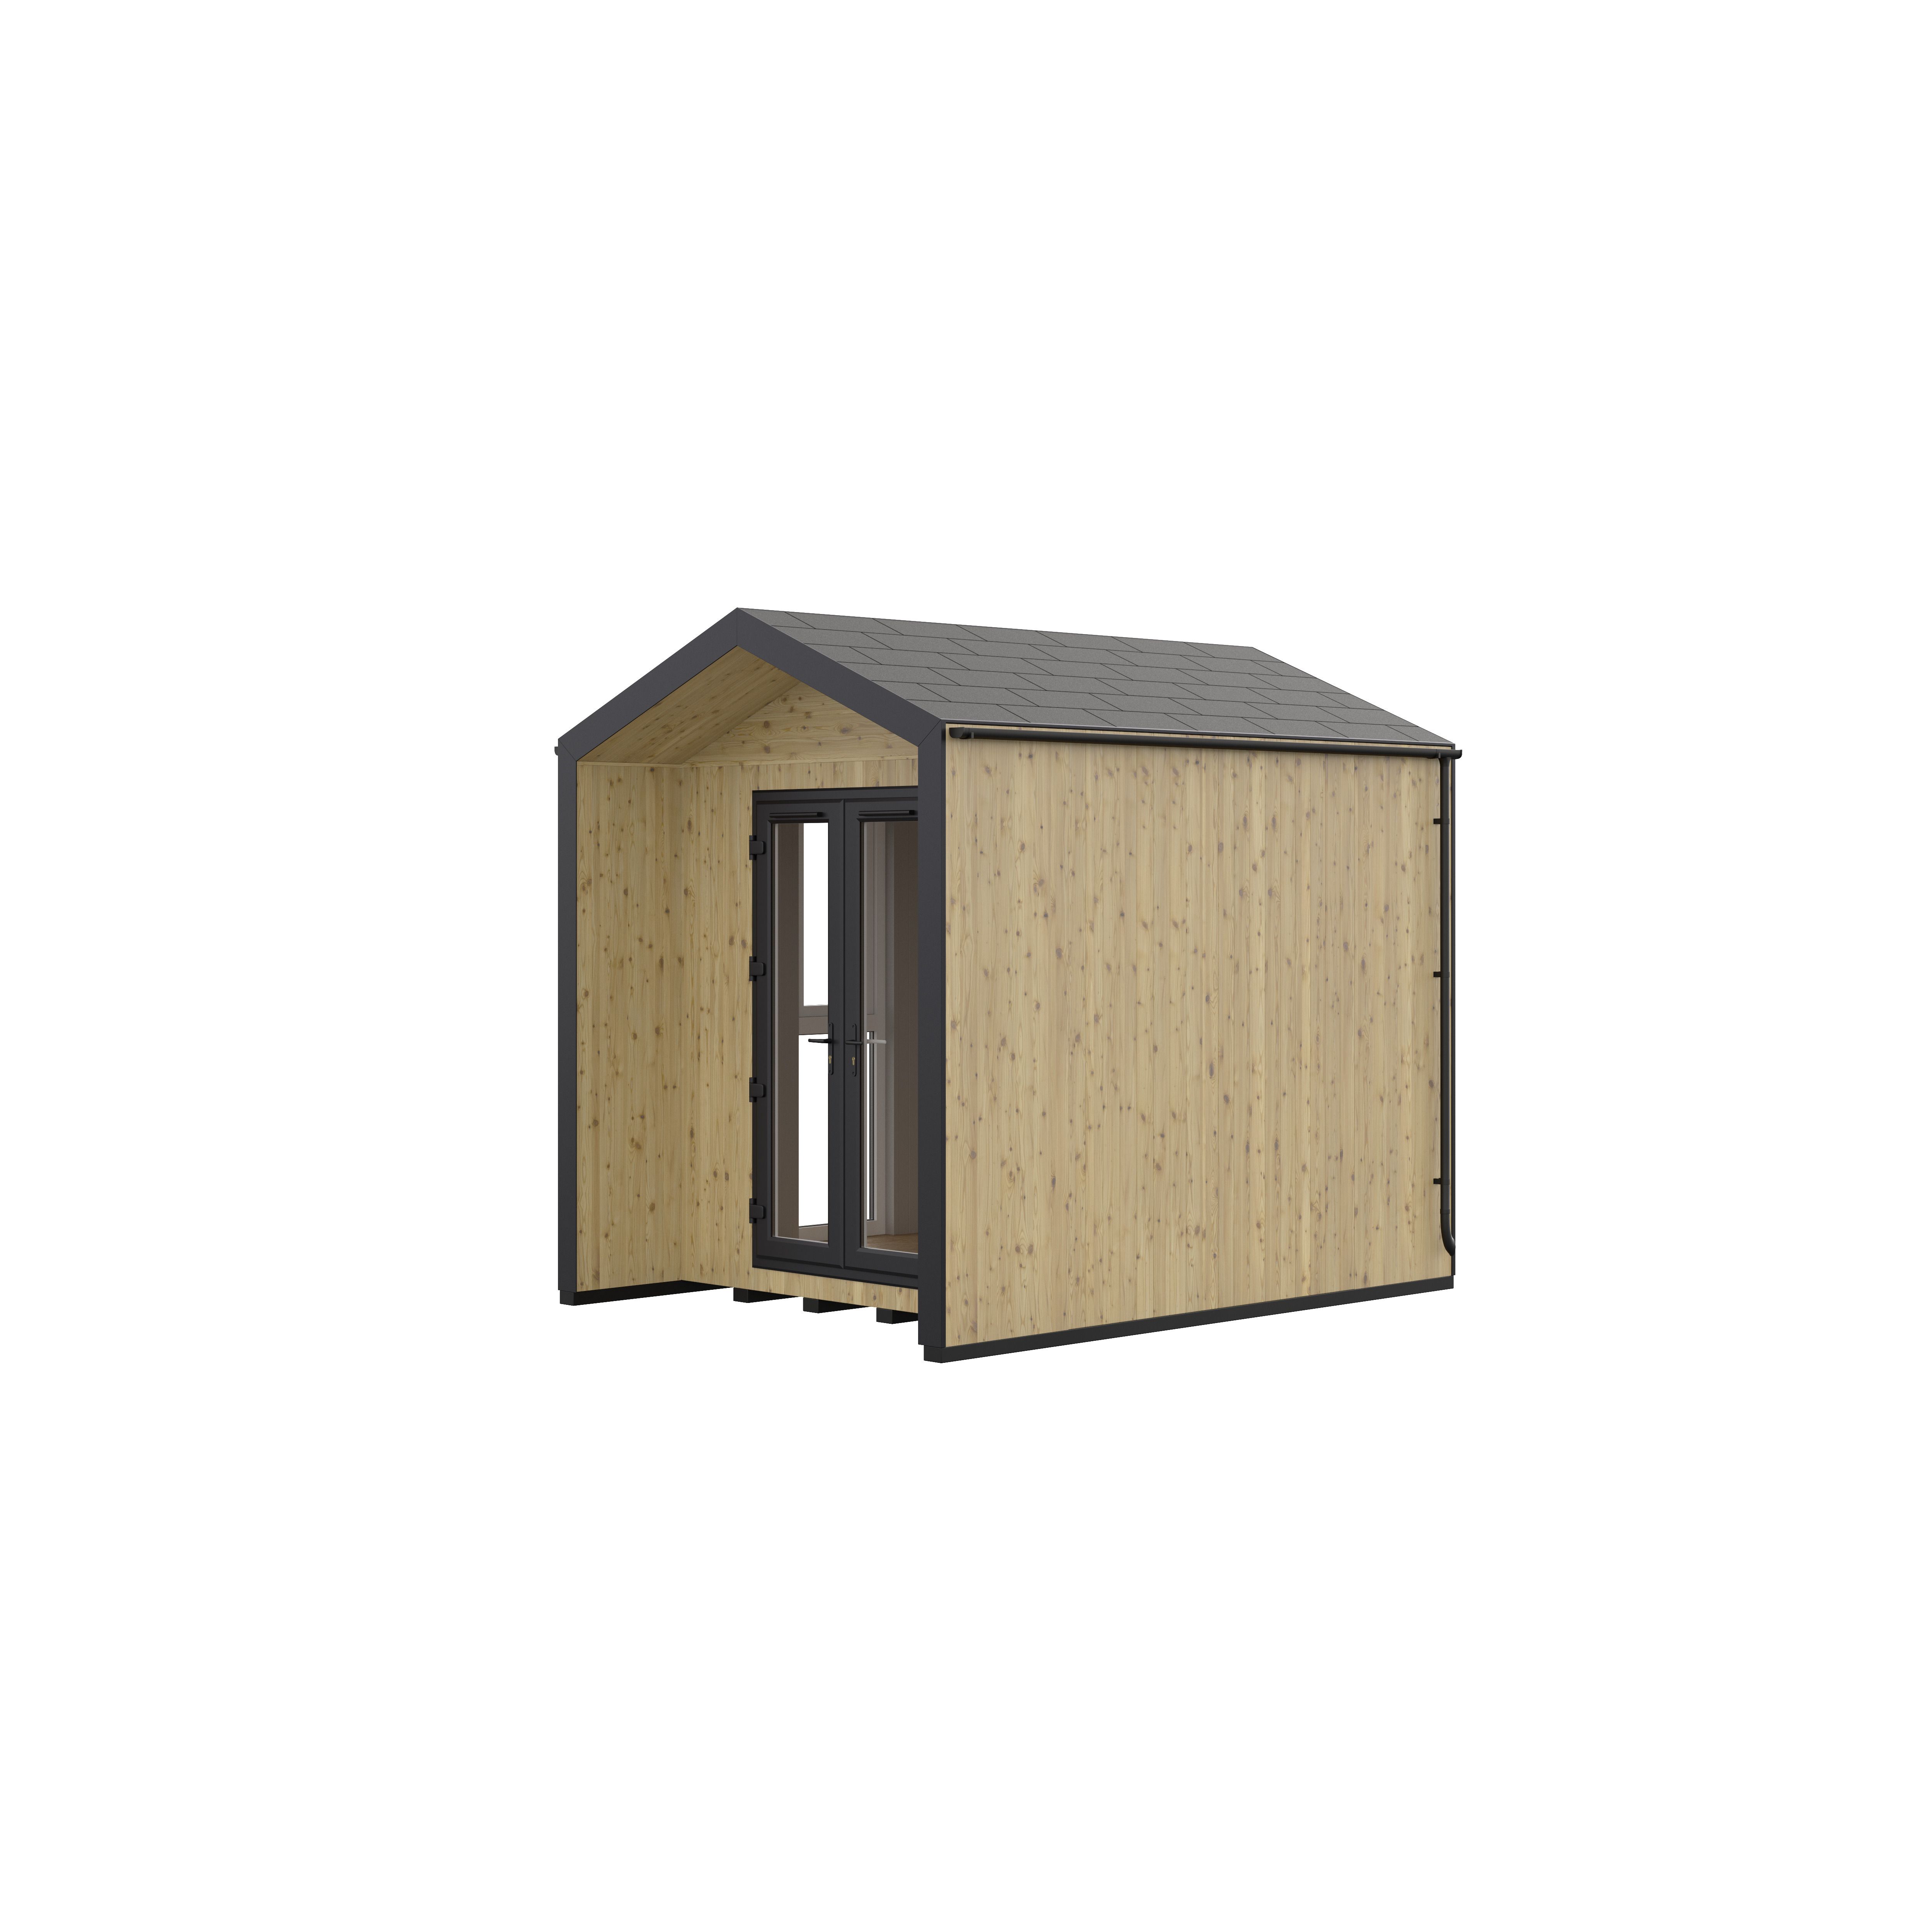 GoodHome Semora 11x8 ft with Double door Pitch Garden room 2.4m x 3.2m (Base included) - Assembly service included